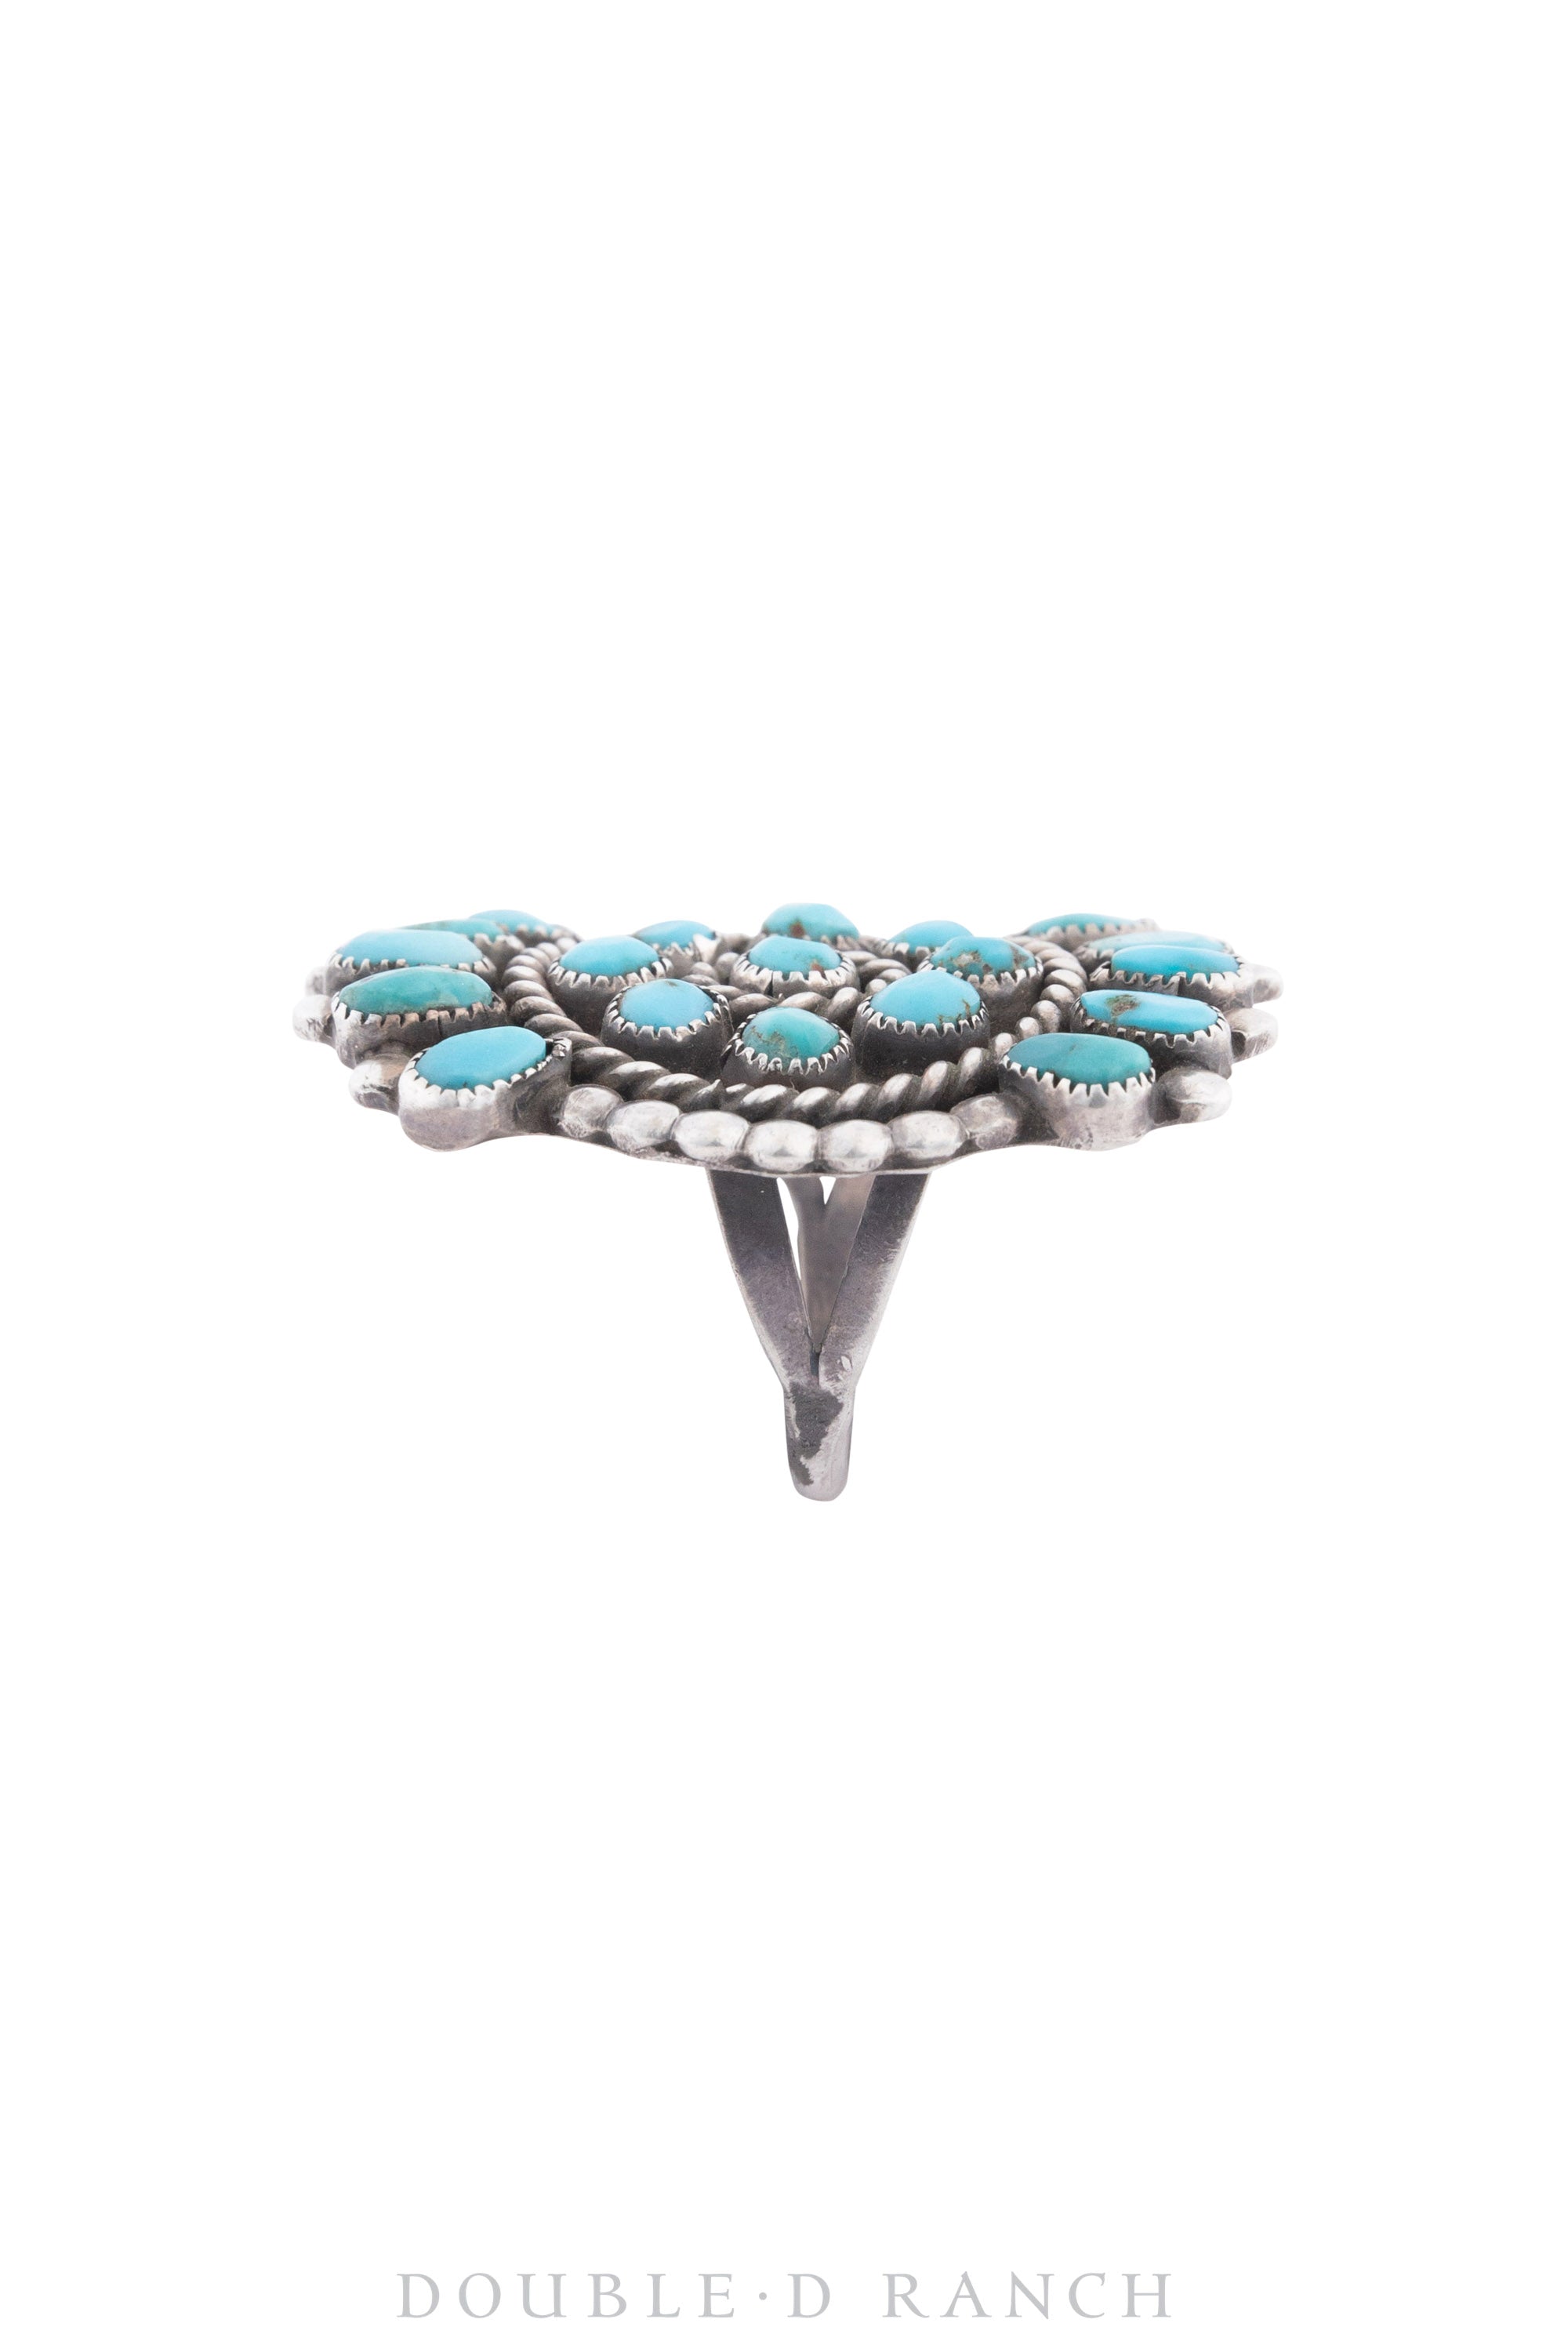 Ring, Cluster, Turquoise, Vintage, 1327